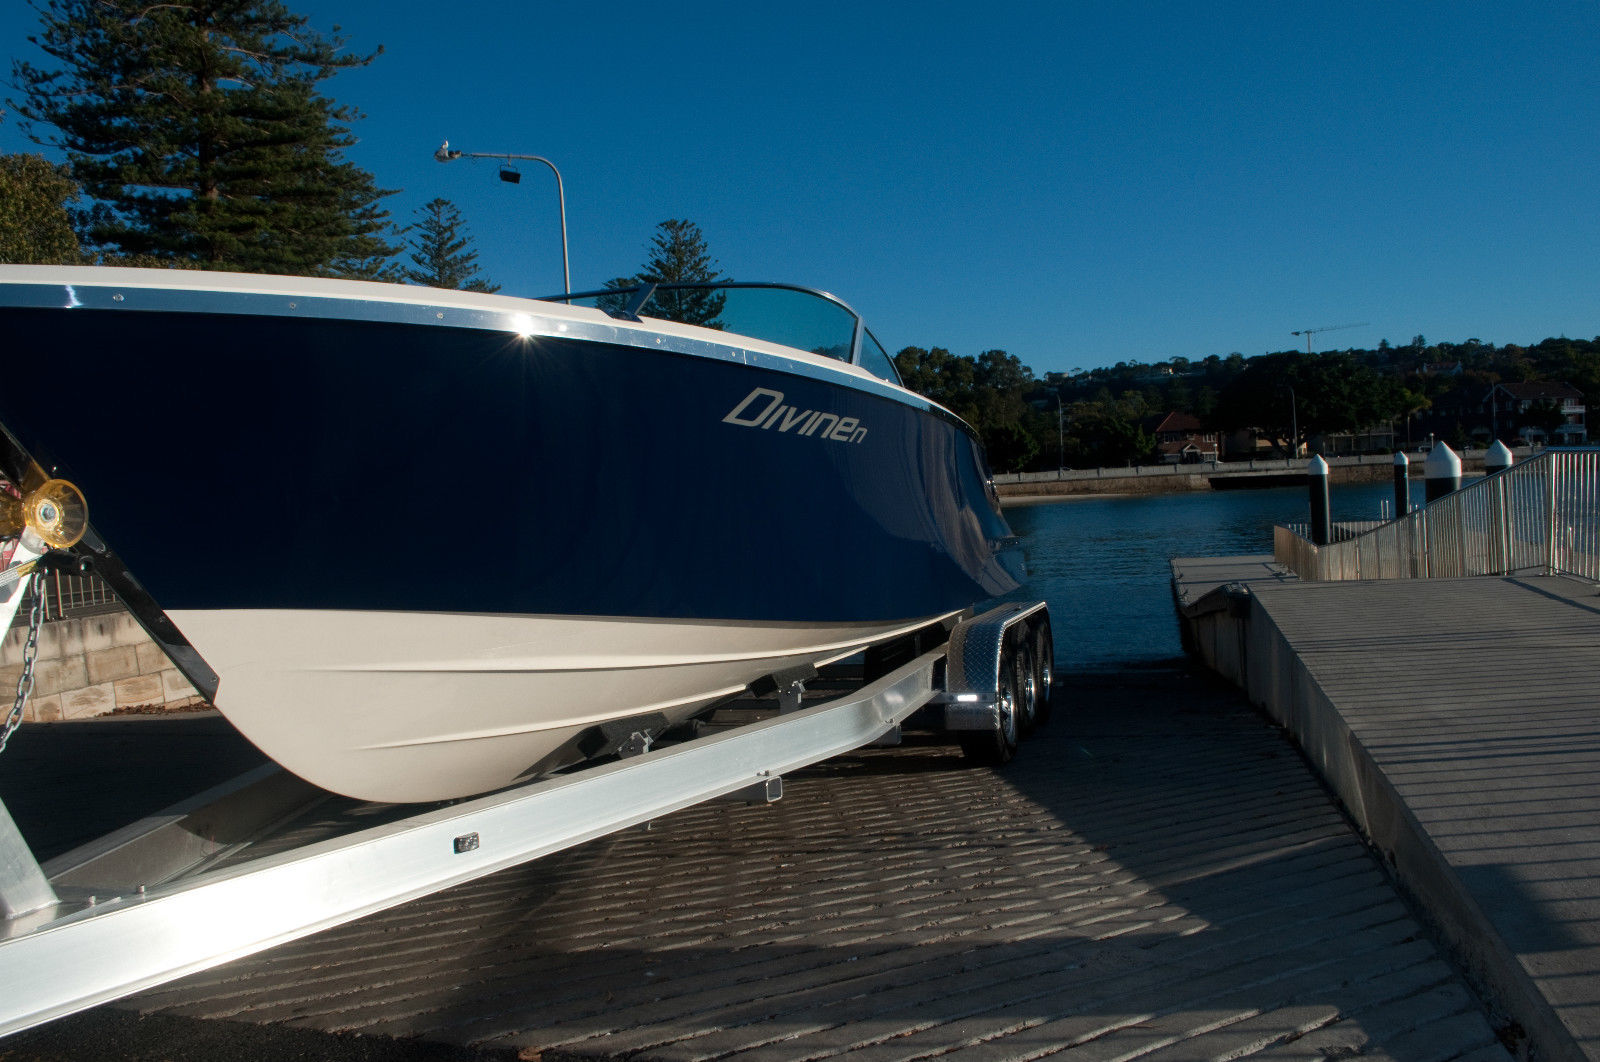 Divine Craft Boat - Not Chris Craft Or Riva Cruise Boat